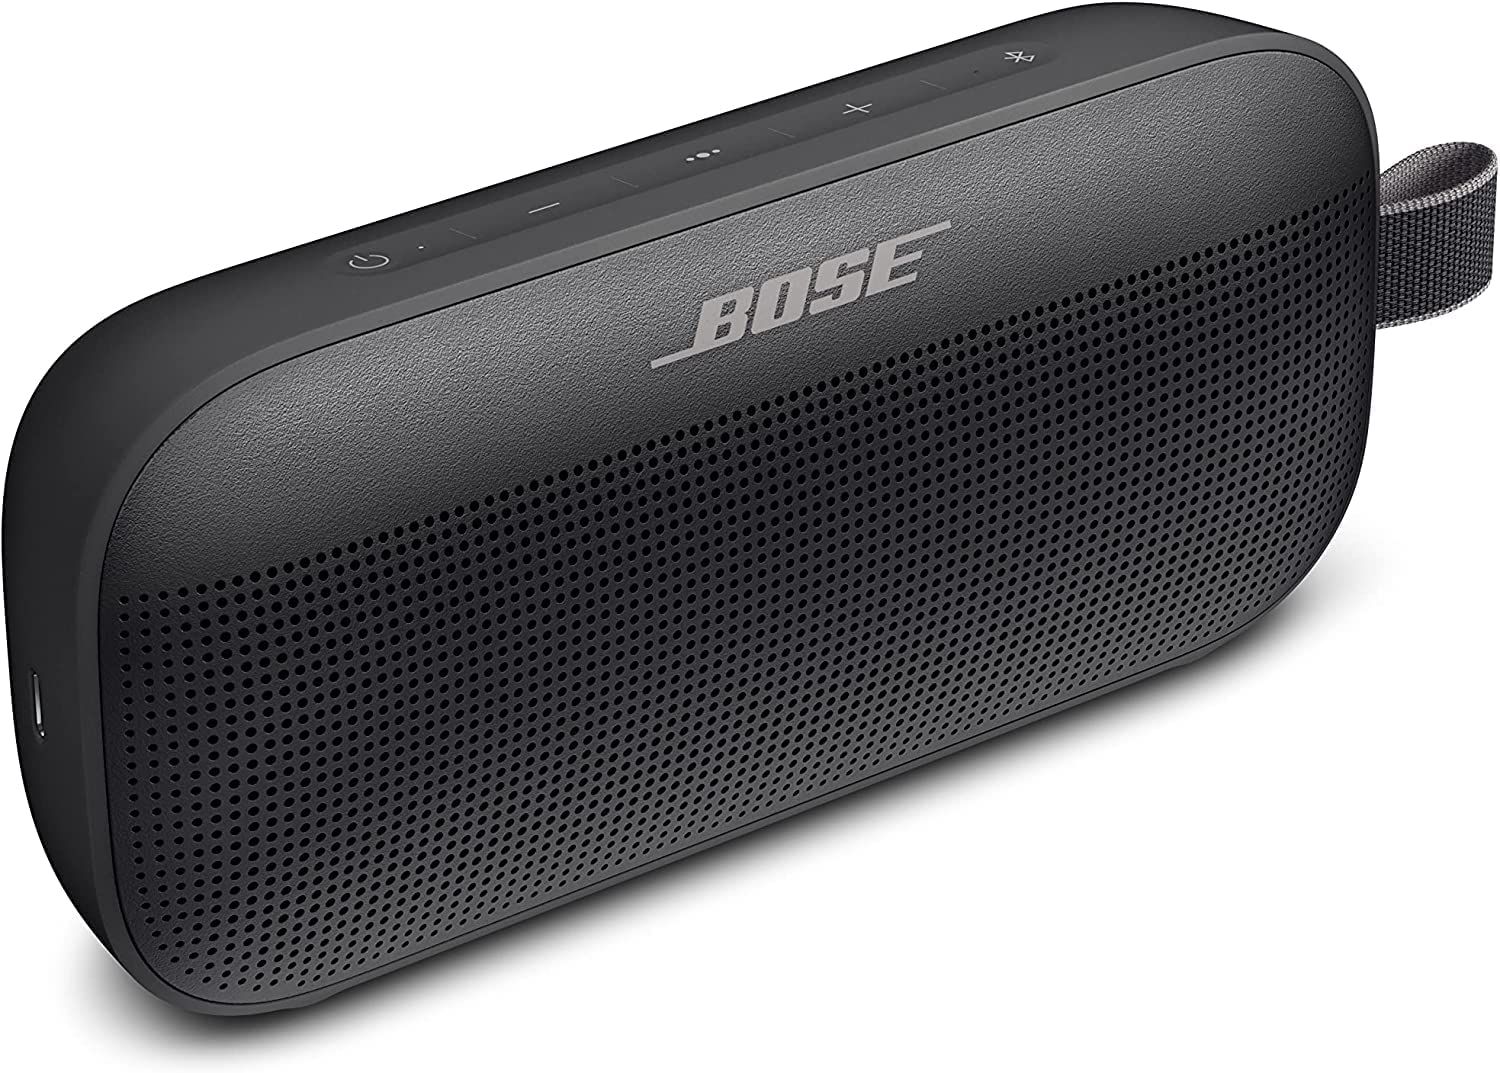 Save $20 on the best Bluetooth speaker around with this Bose